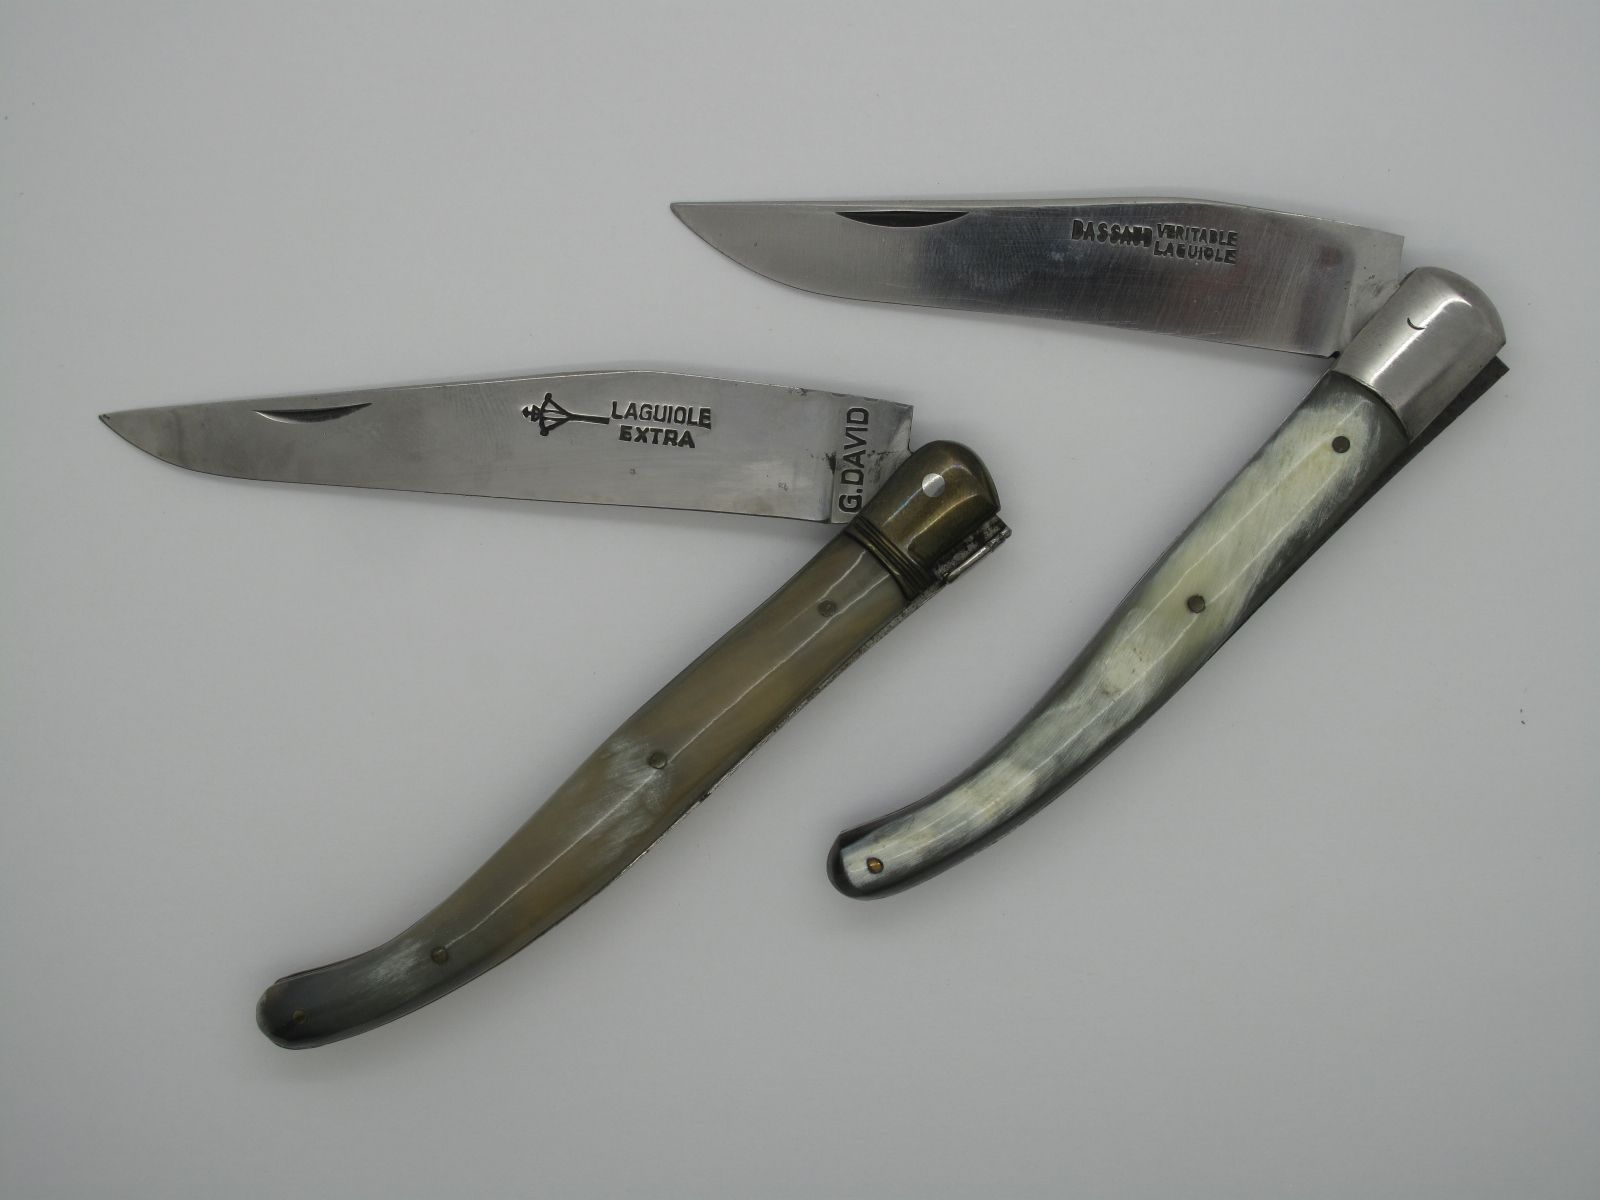 Pocket Knife by Laguiole, with polished horn scales, brass bolster, spring work backed and